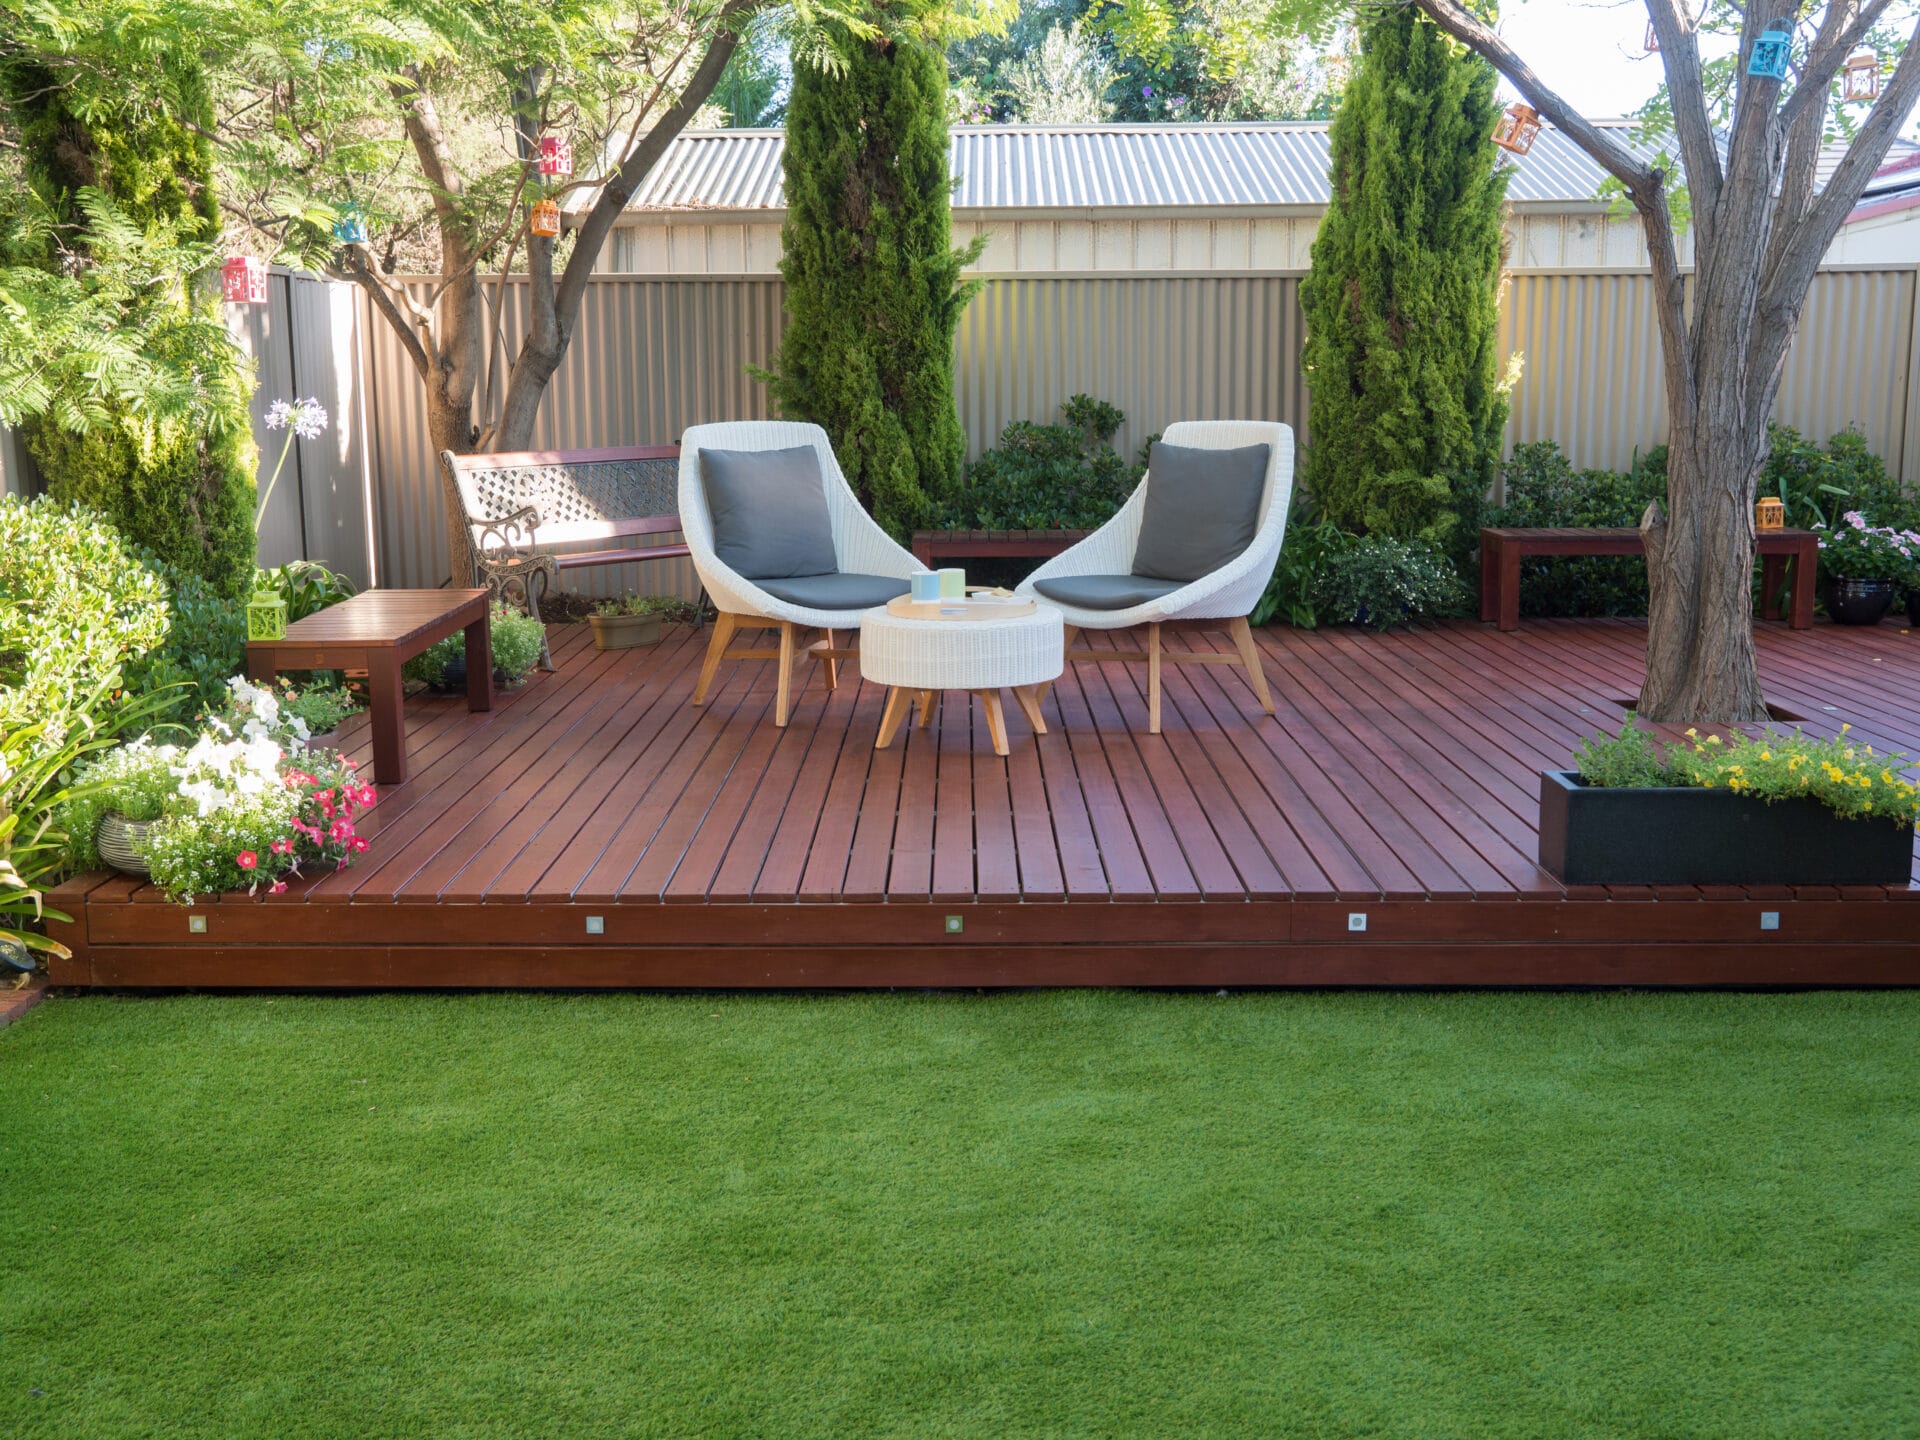 Timber decking gives your backyard a natural look